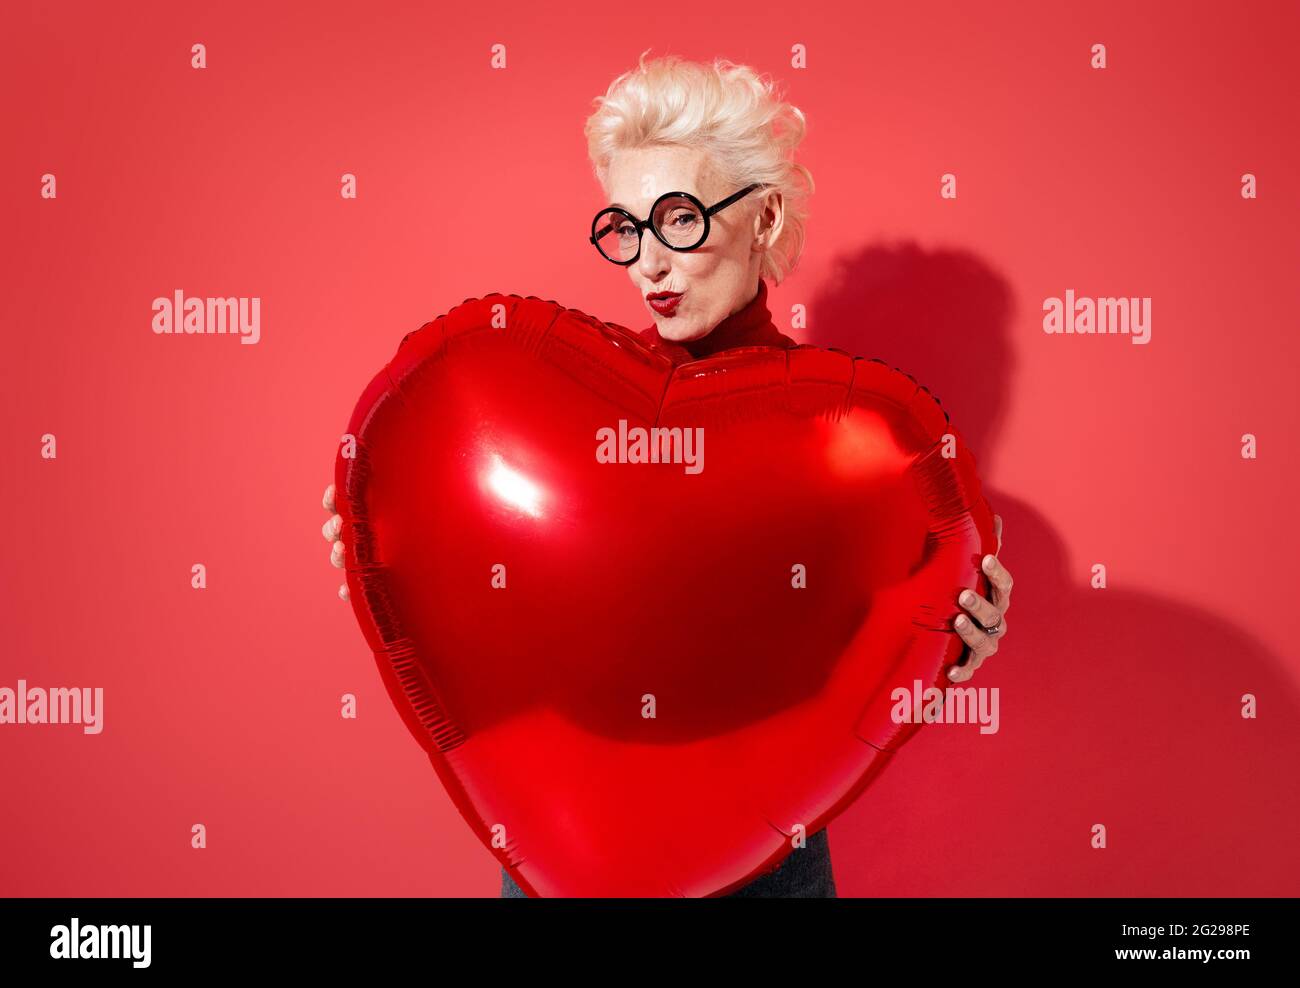 Happy woman holds red heart shape balloon. Photo of smiling elderly woman in love on red background. Valentine's Day Stock Photo